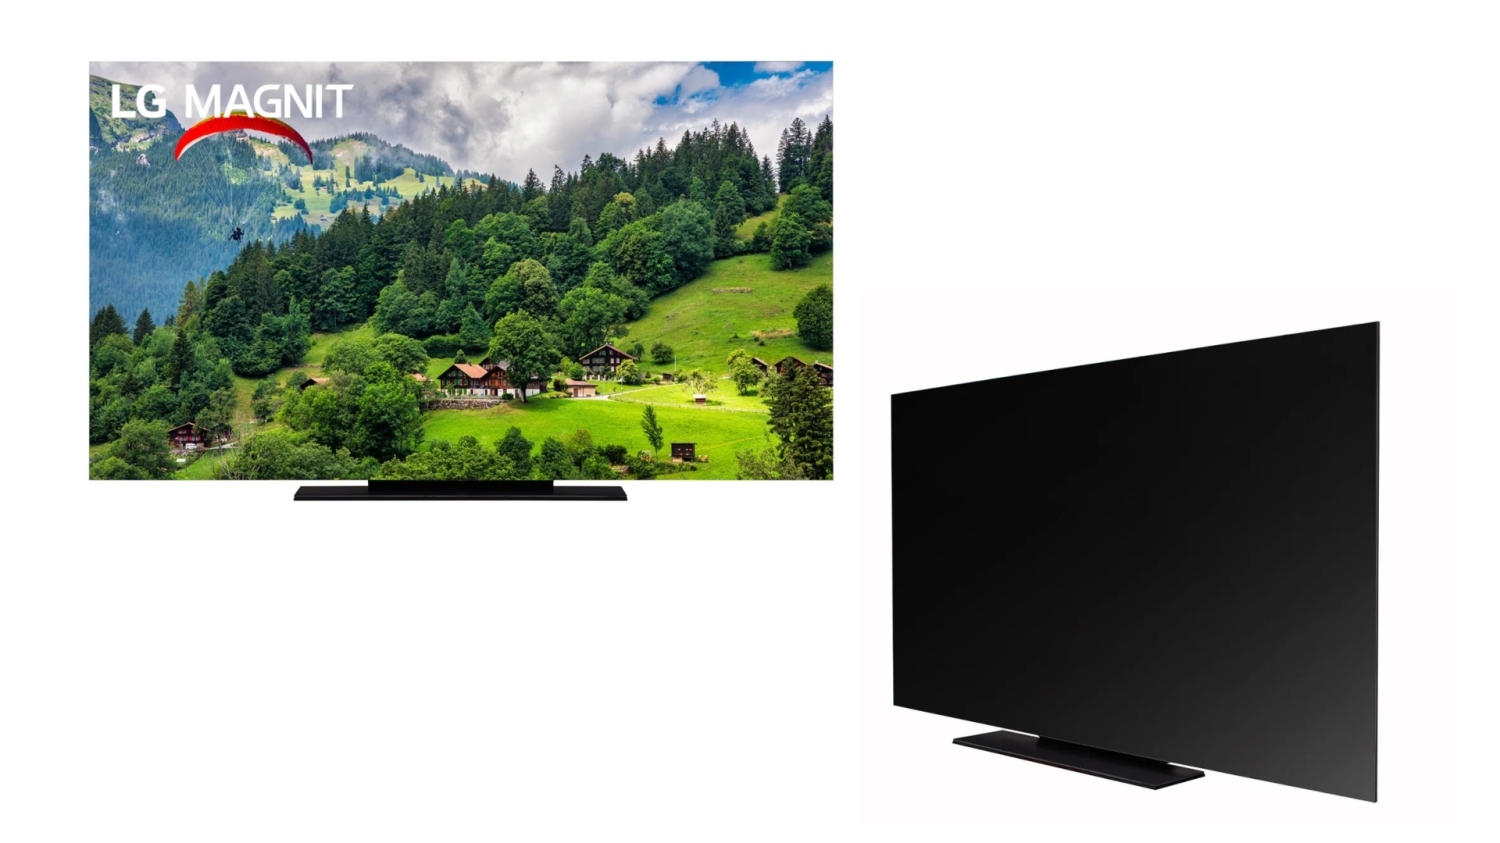 TweakTown Enlarged Image - The new LG MAGNIT is a massive 118-inch MicroLED 4K TV, image credit: LG.